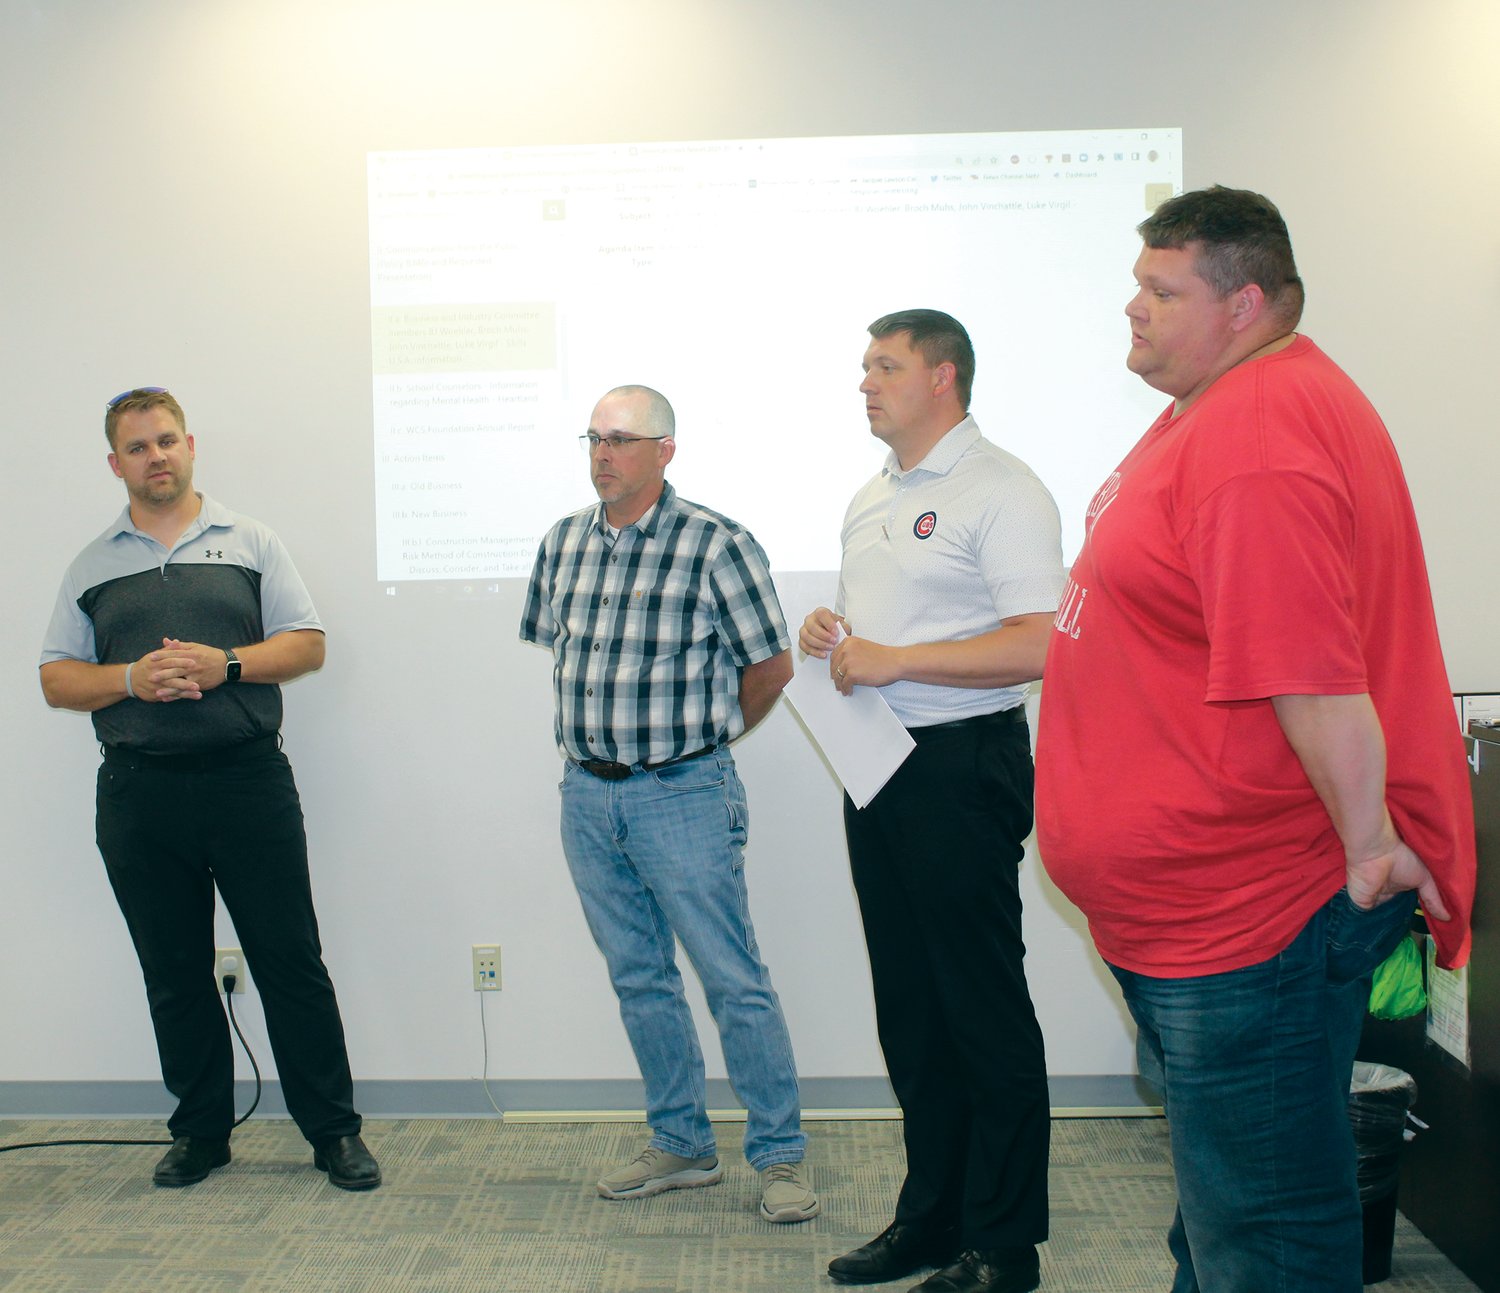 Wayne Business & Industry members John Vinchattle (left), Broch Muhs, Luke Virgil and BJ Woehler talked about the benefits of a Skills USA program during the Board of Education meeting.